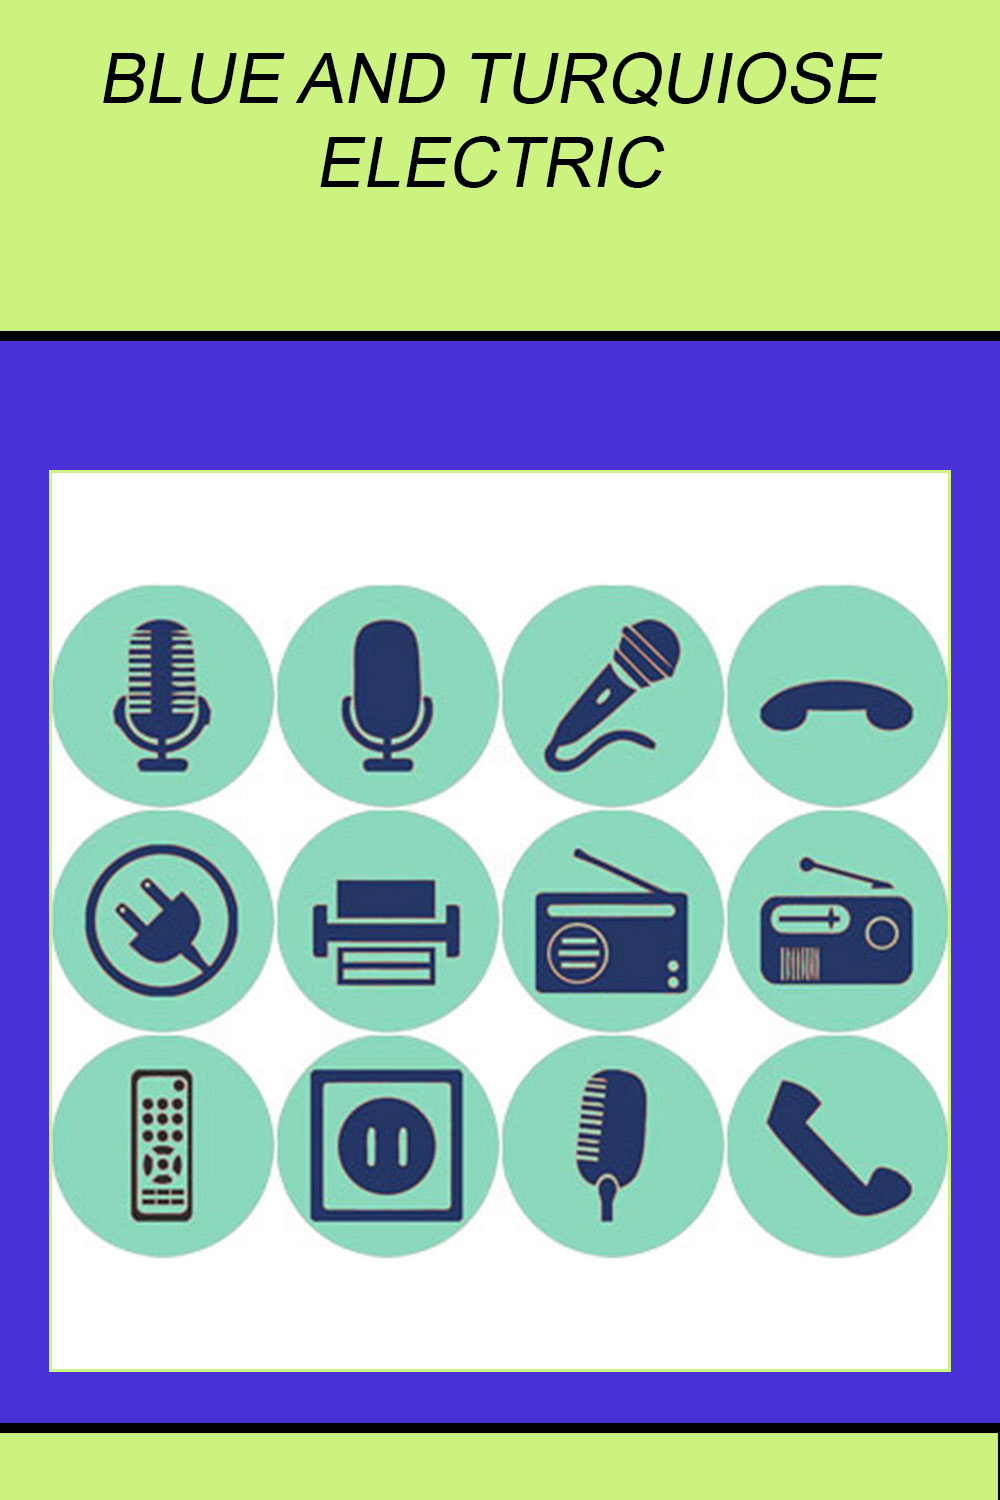 BLUE AND TURQUIOSE ELECTRIC ICONS pinterest preview image.